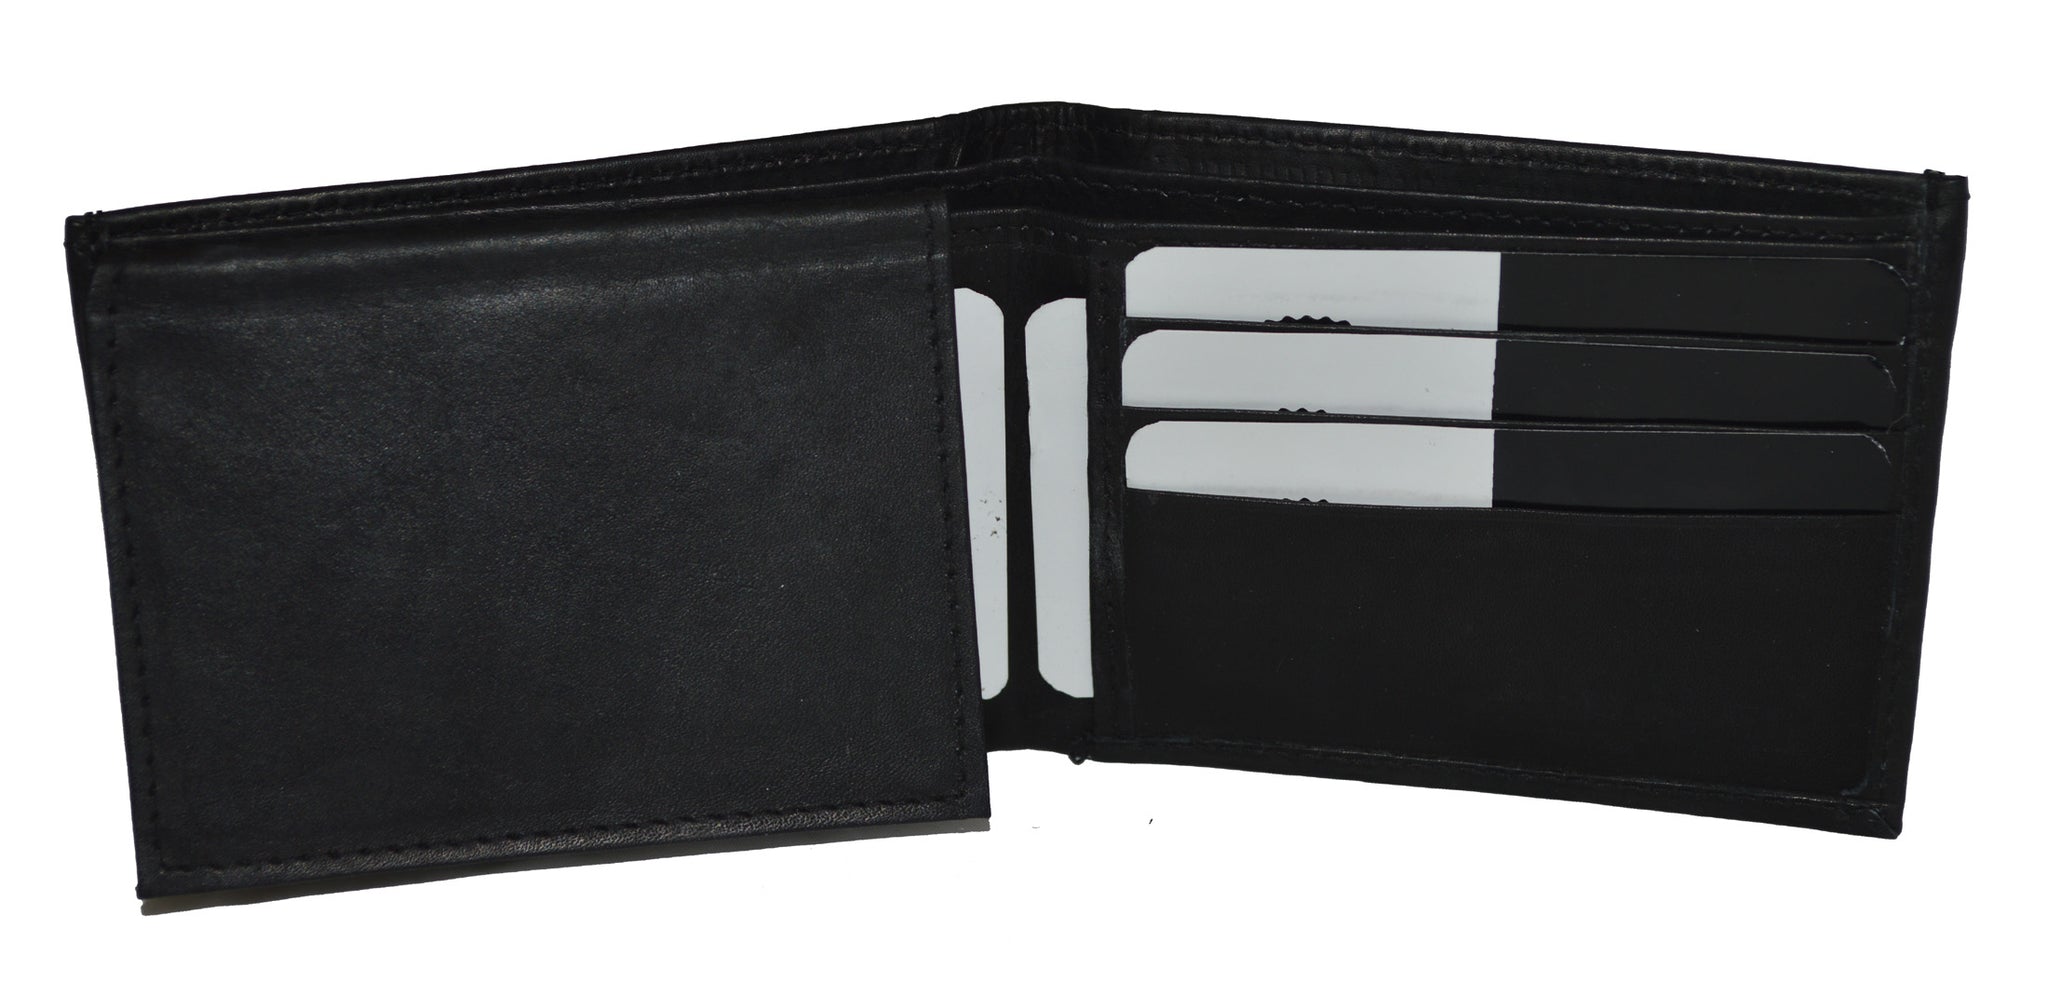 Leatherboss Genuine Leather Men Slim and Compact Credit Card Bifold Wallet